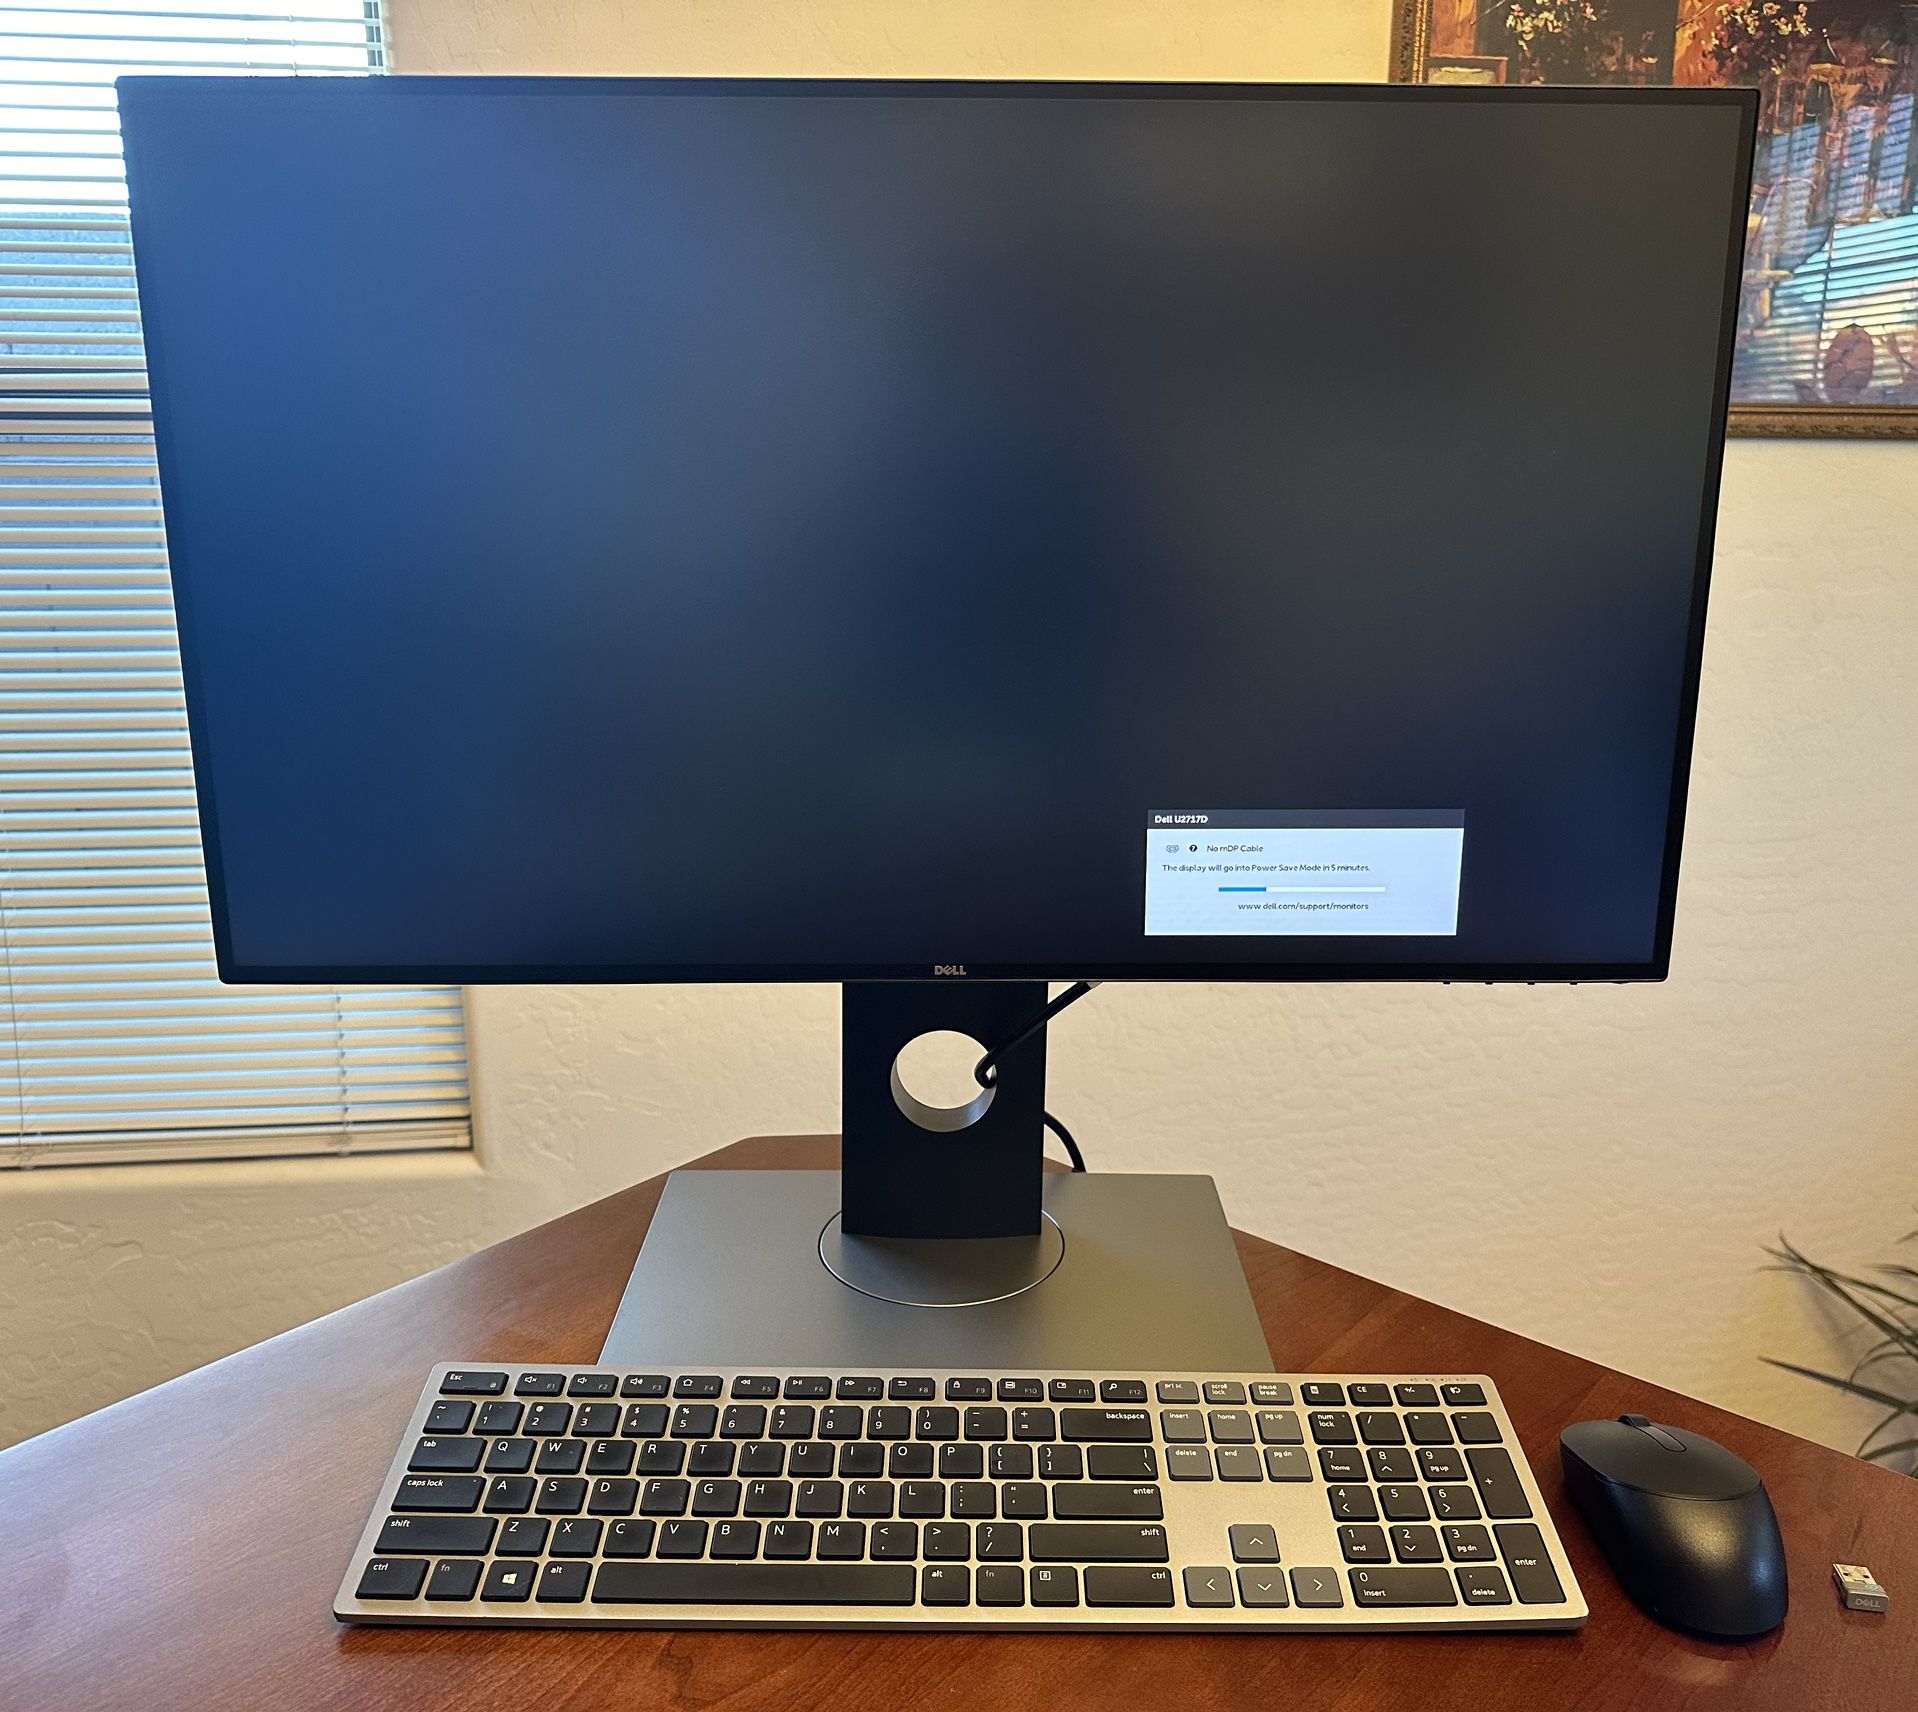 Dell 27” Monitor, Keyboard and Mouse 